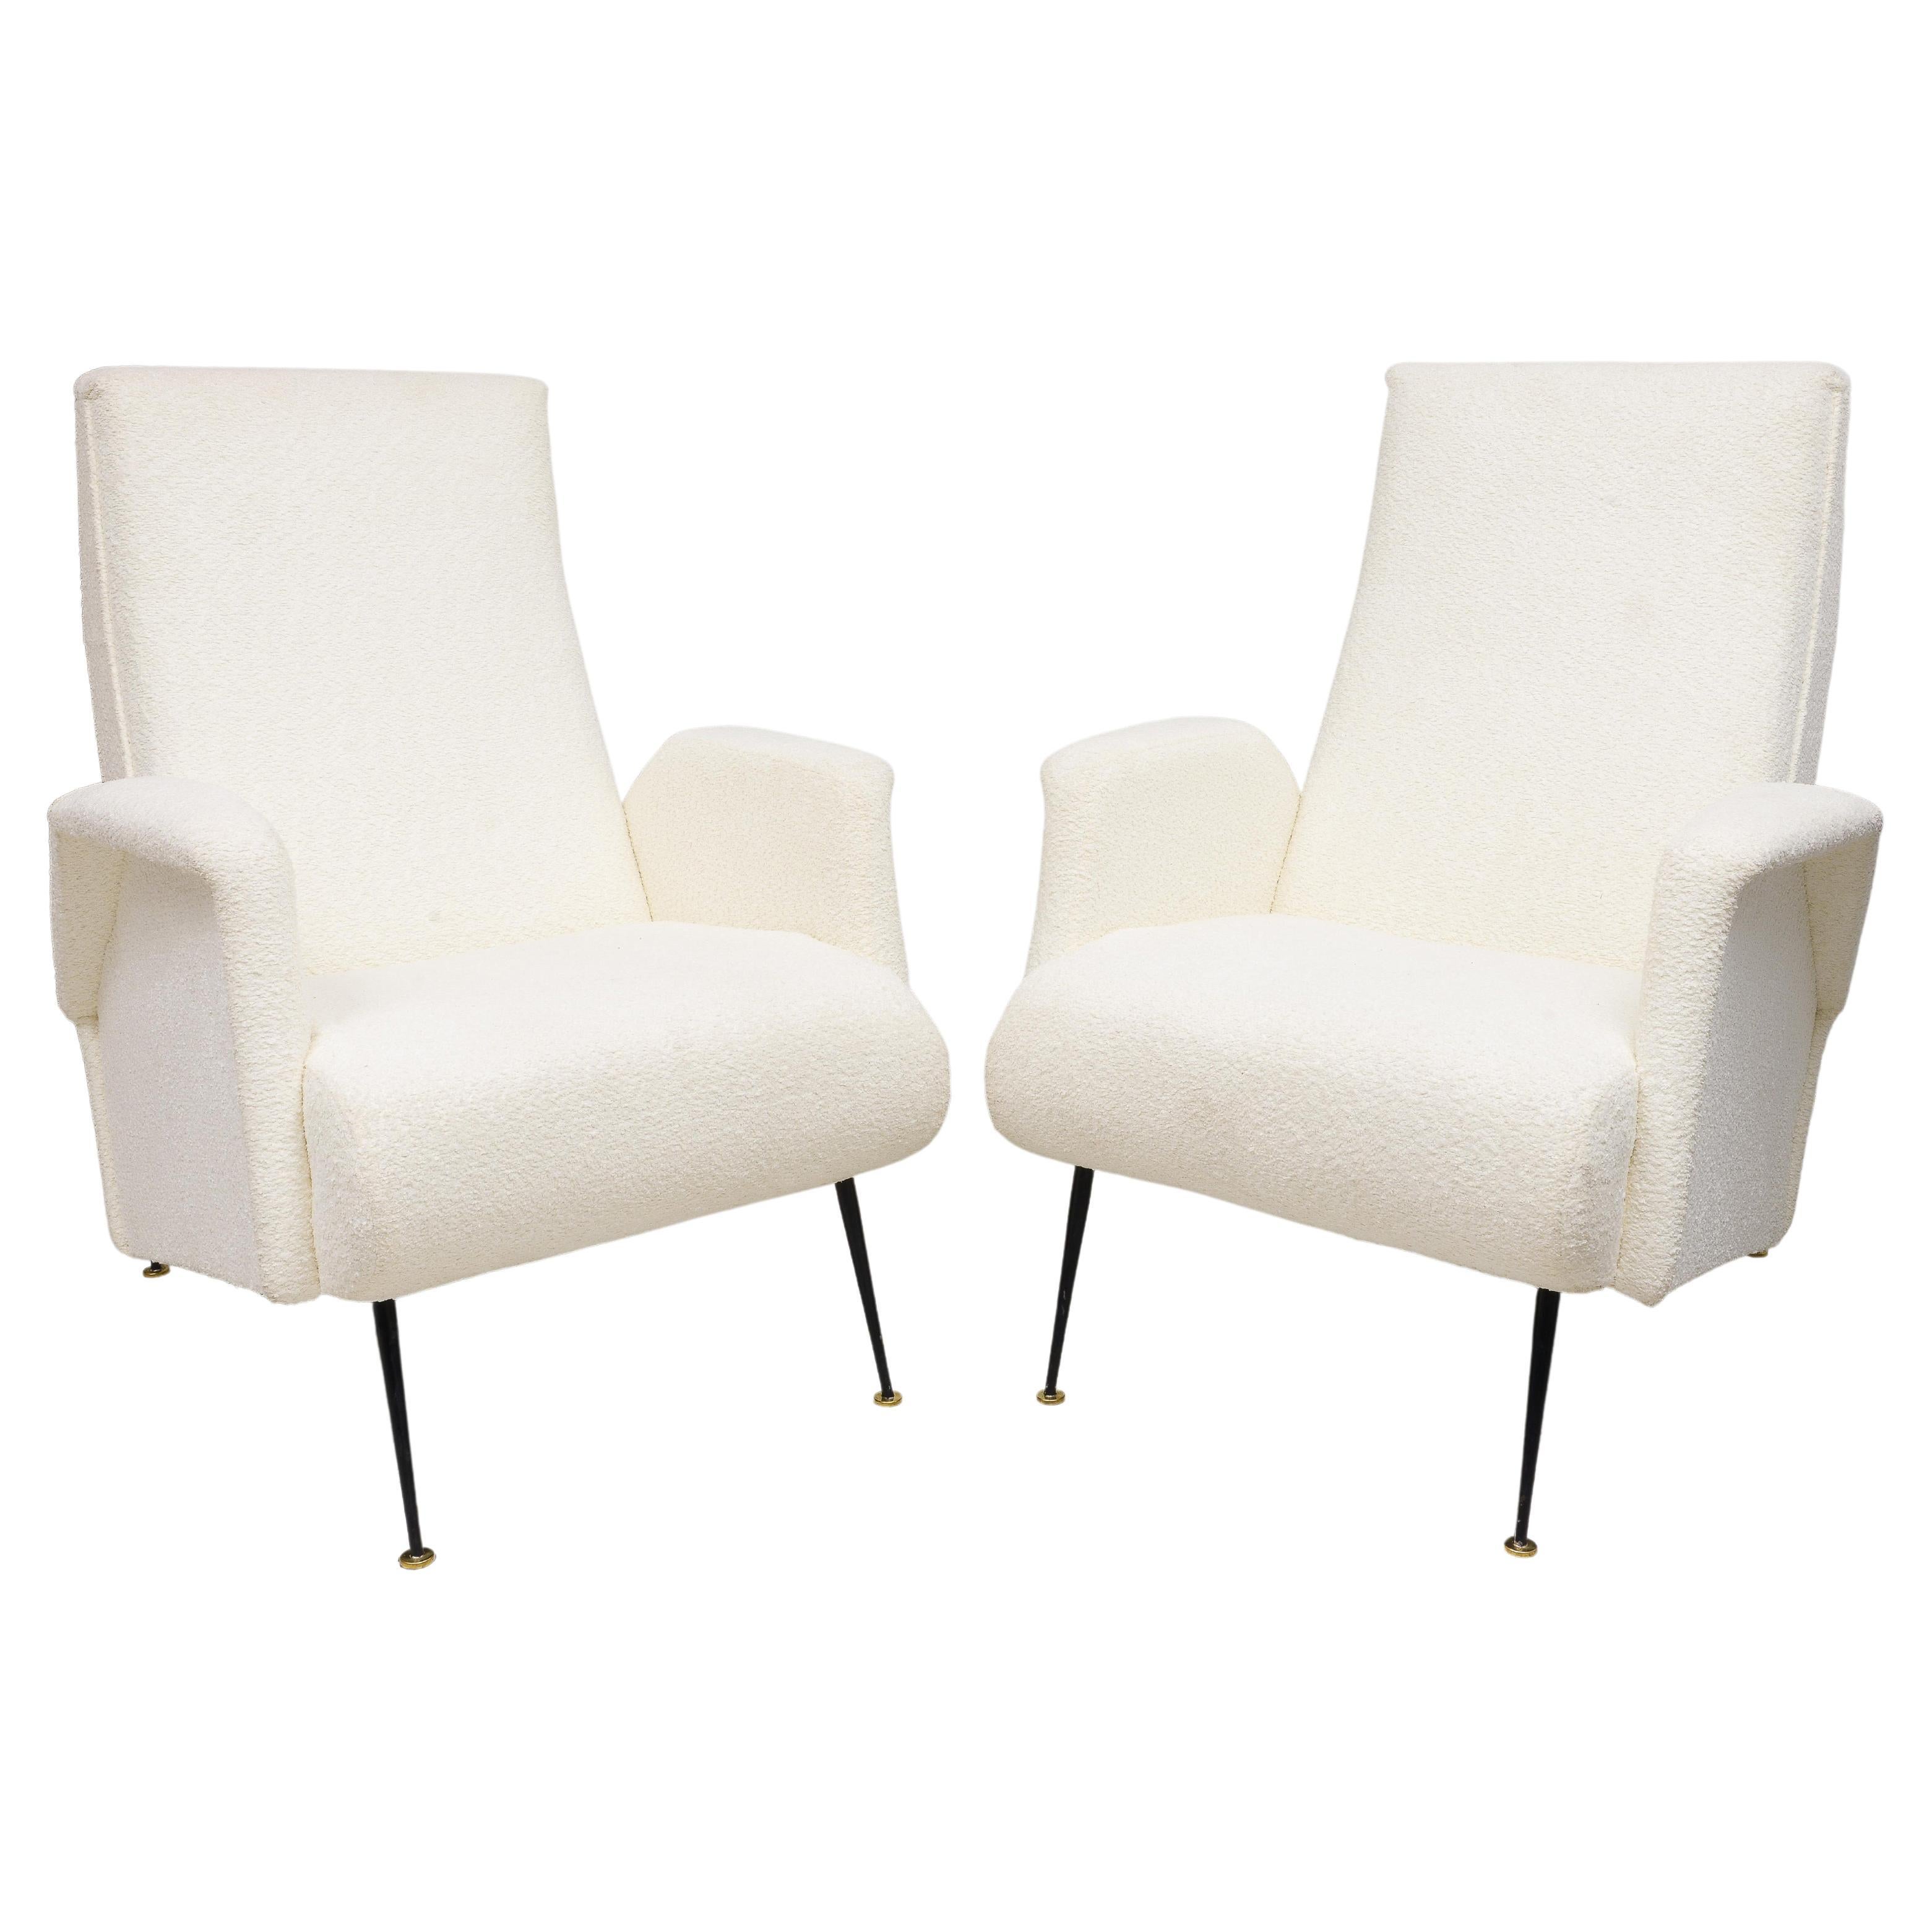 Pair of finely crafted and recently upholstered vintage Italian lounge chairs -sculptural design - extremely comfortable.